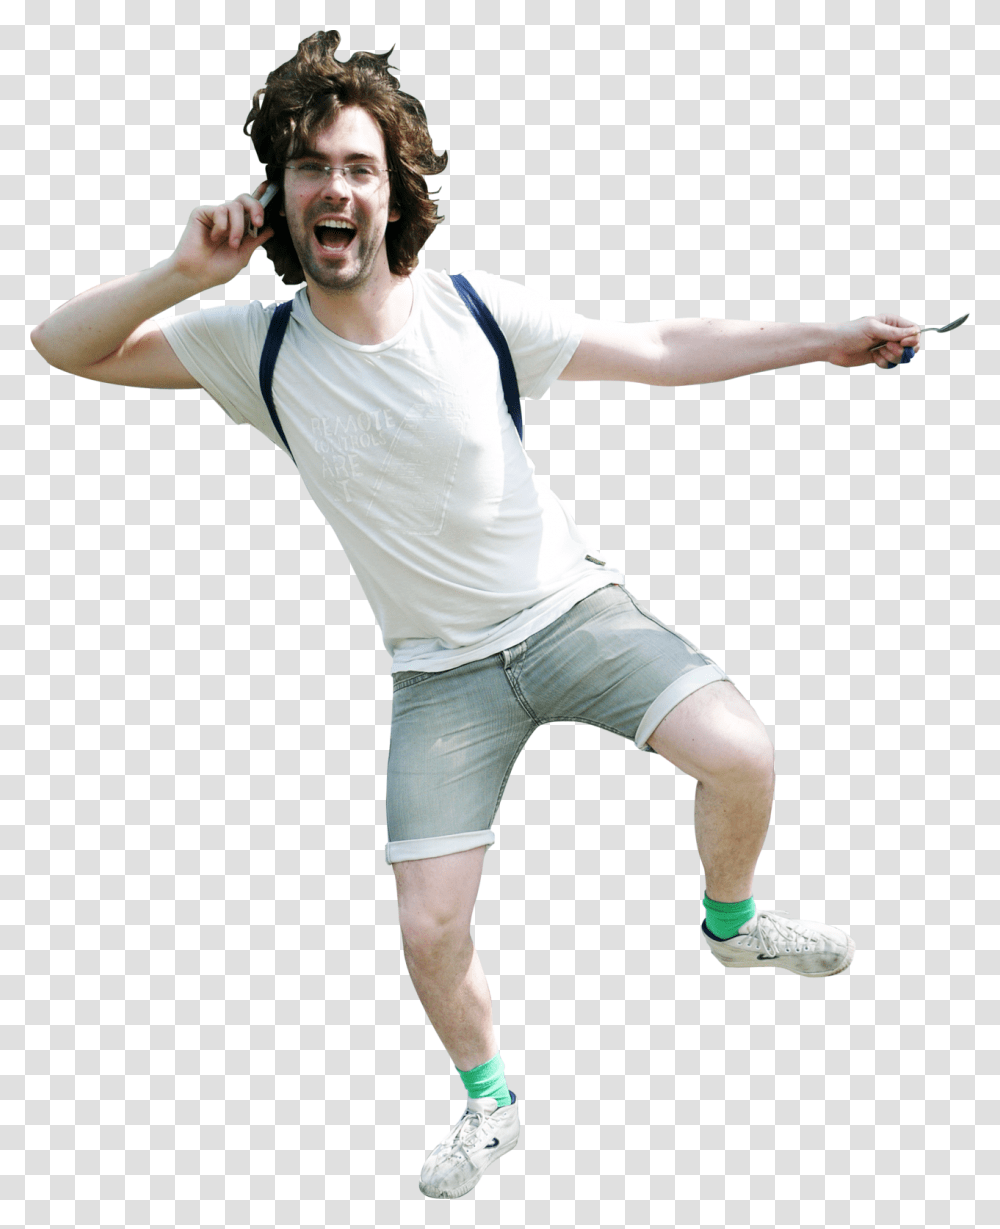 Download Jumping Image Background People Happy People Jumping, Person, Clothing, Shorts, Dance Pose Transparent Png